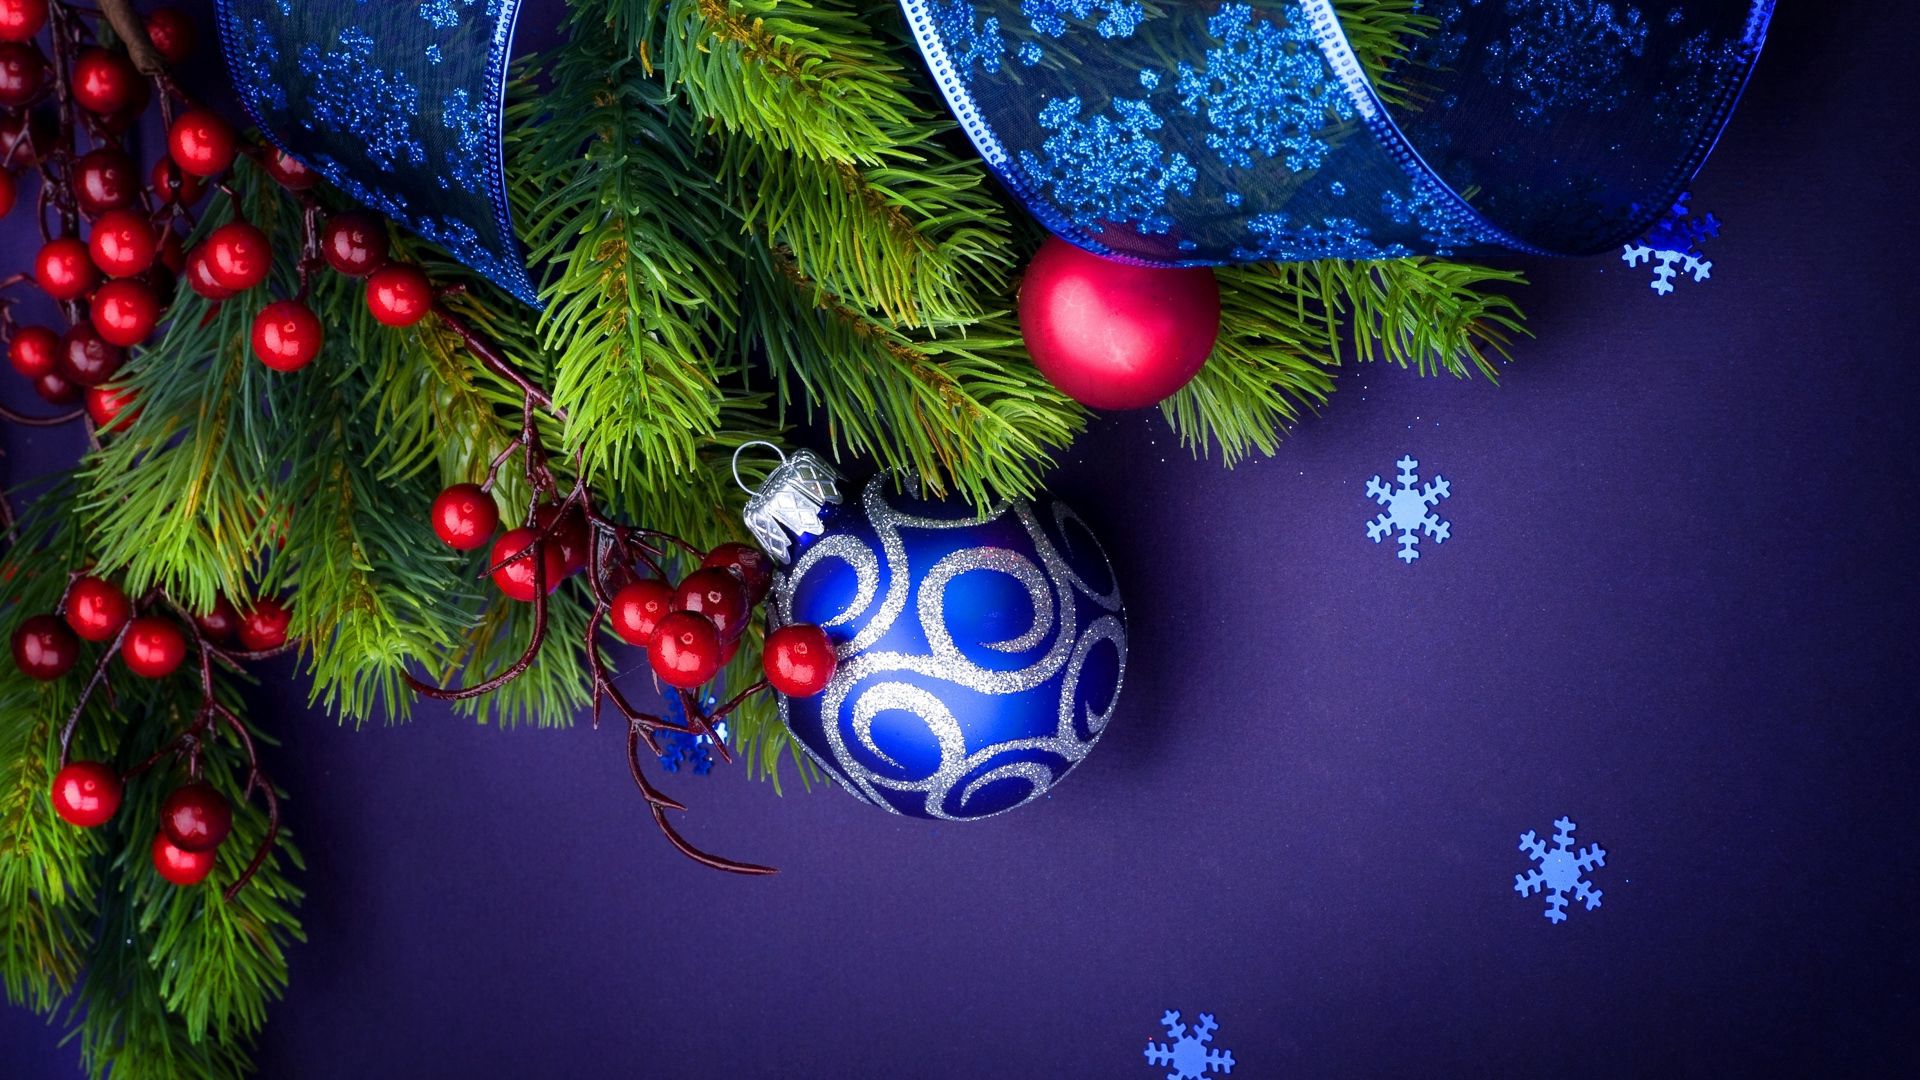 holidays, fir, new year, decorations New Lock Screen Backgrounds